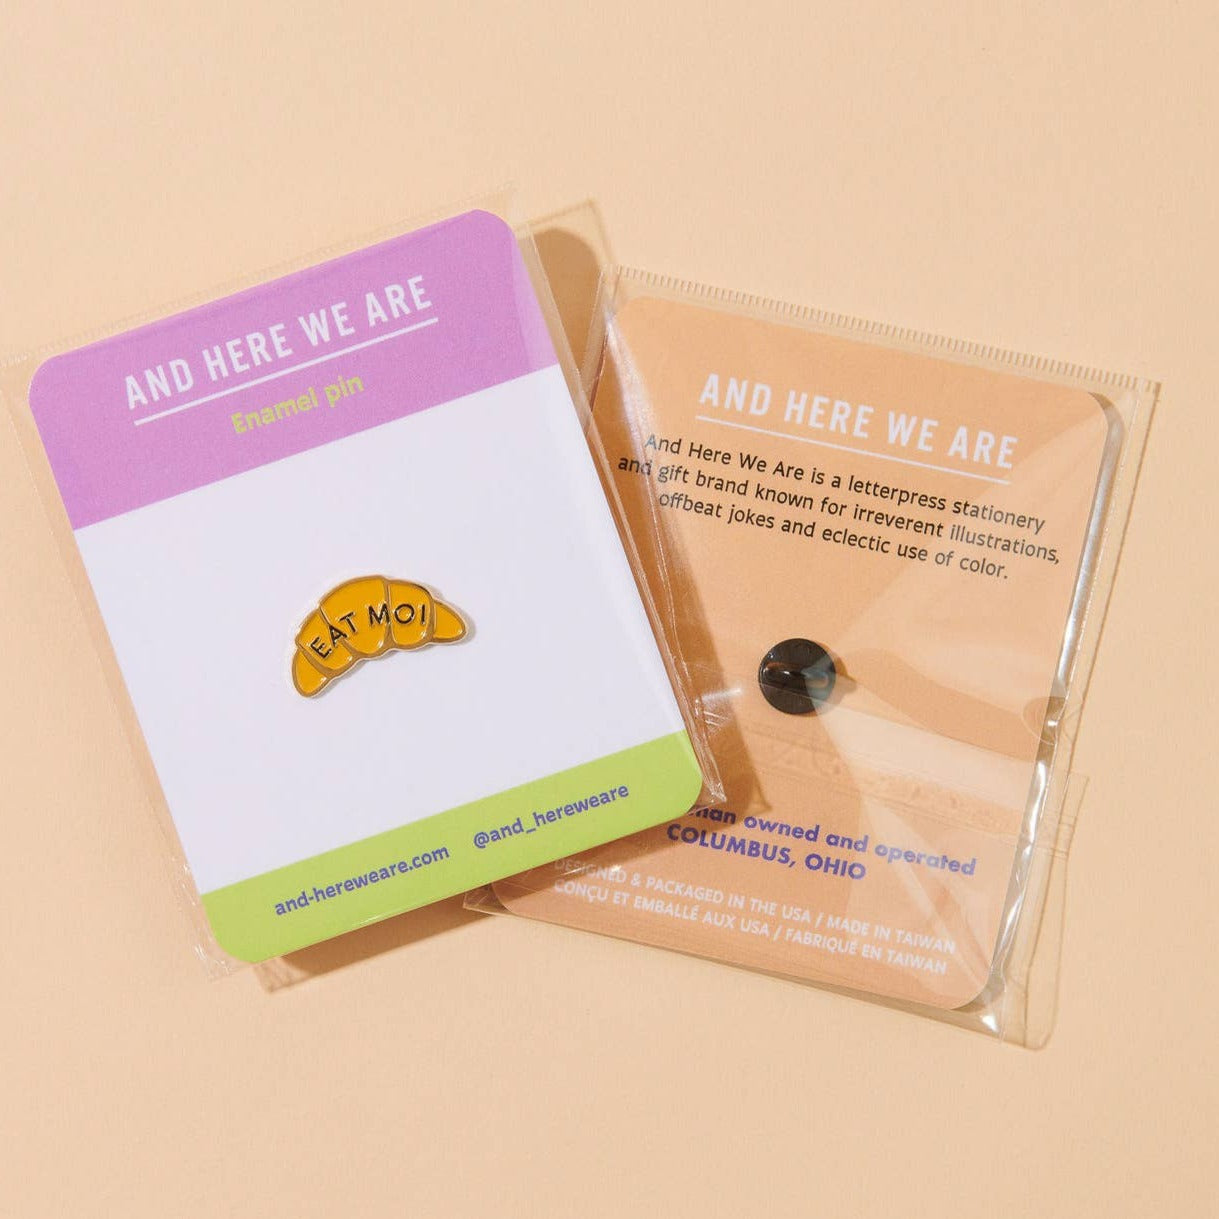 Enamel pin in the shape of a croissant that says "EAT MOI". The lapel pin is staged on a card backing and the picture shows the back and front of the pin with the logo "and here we are"